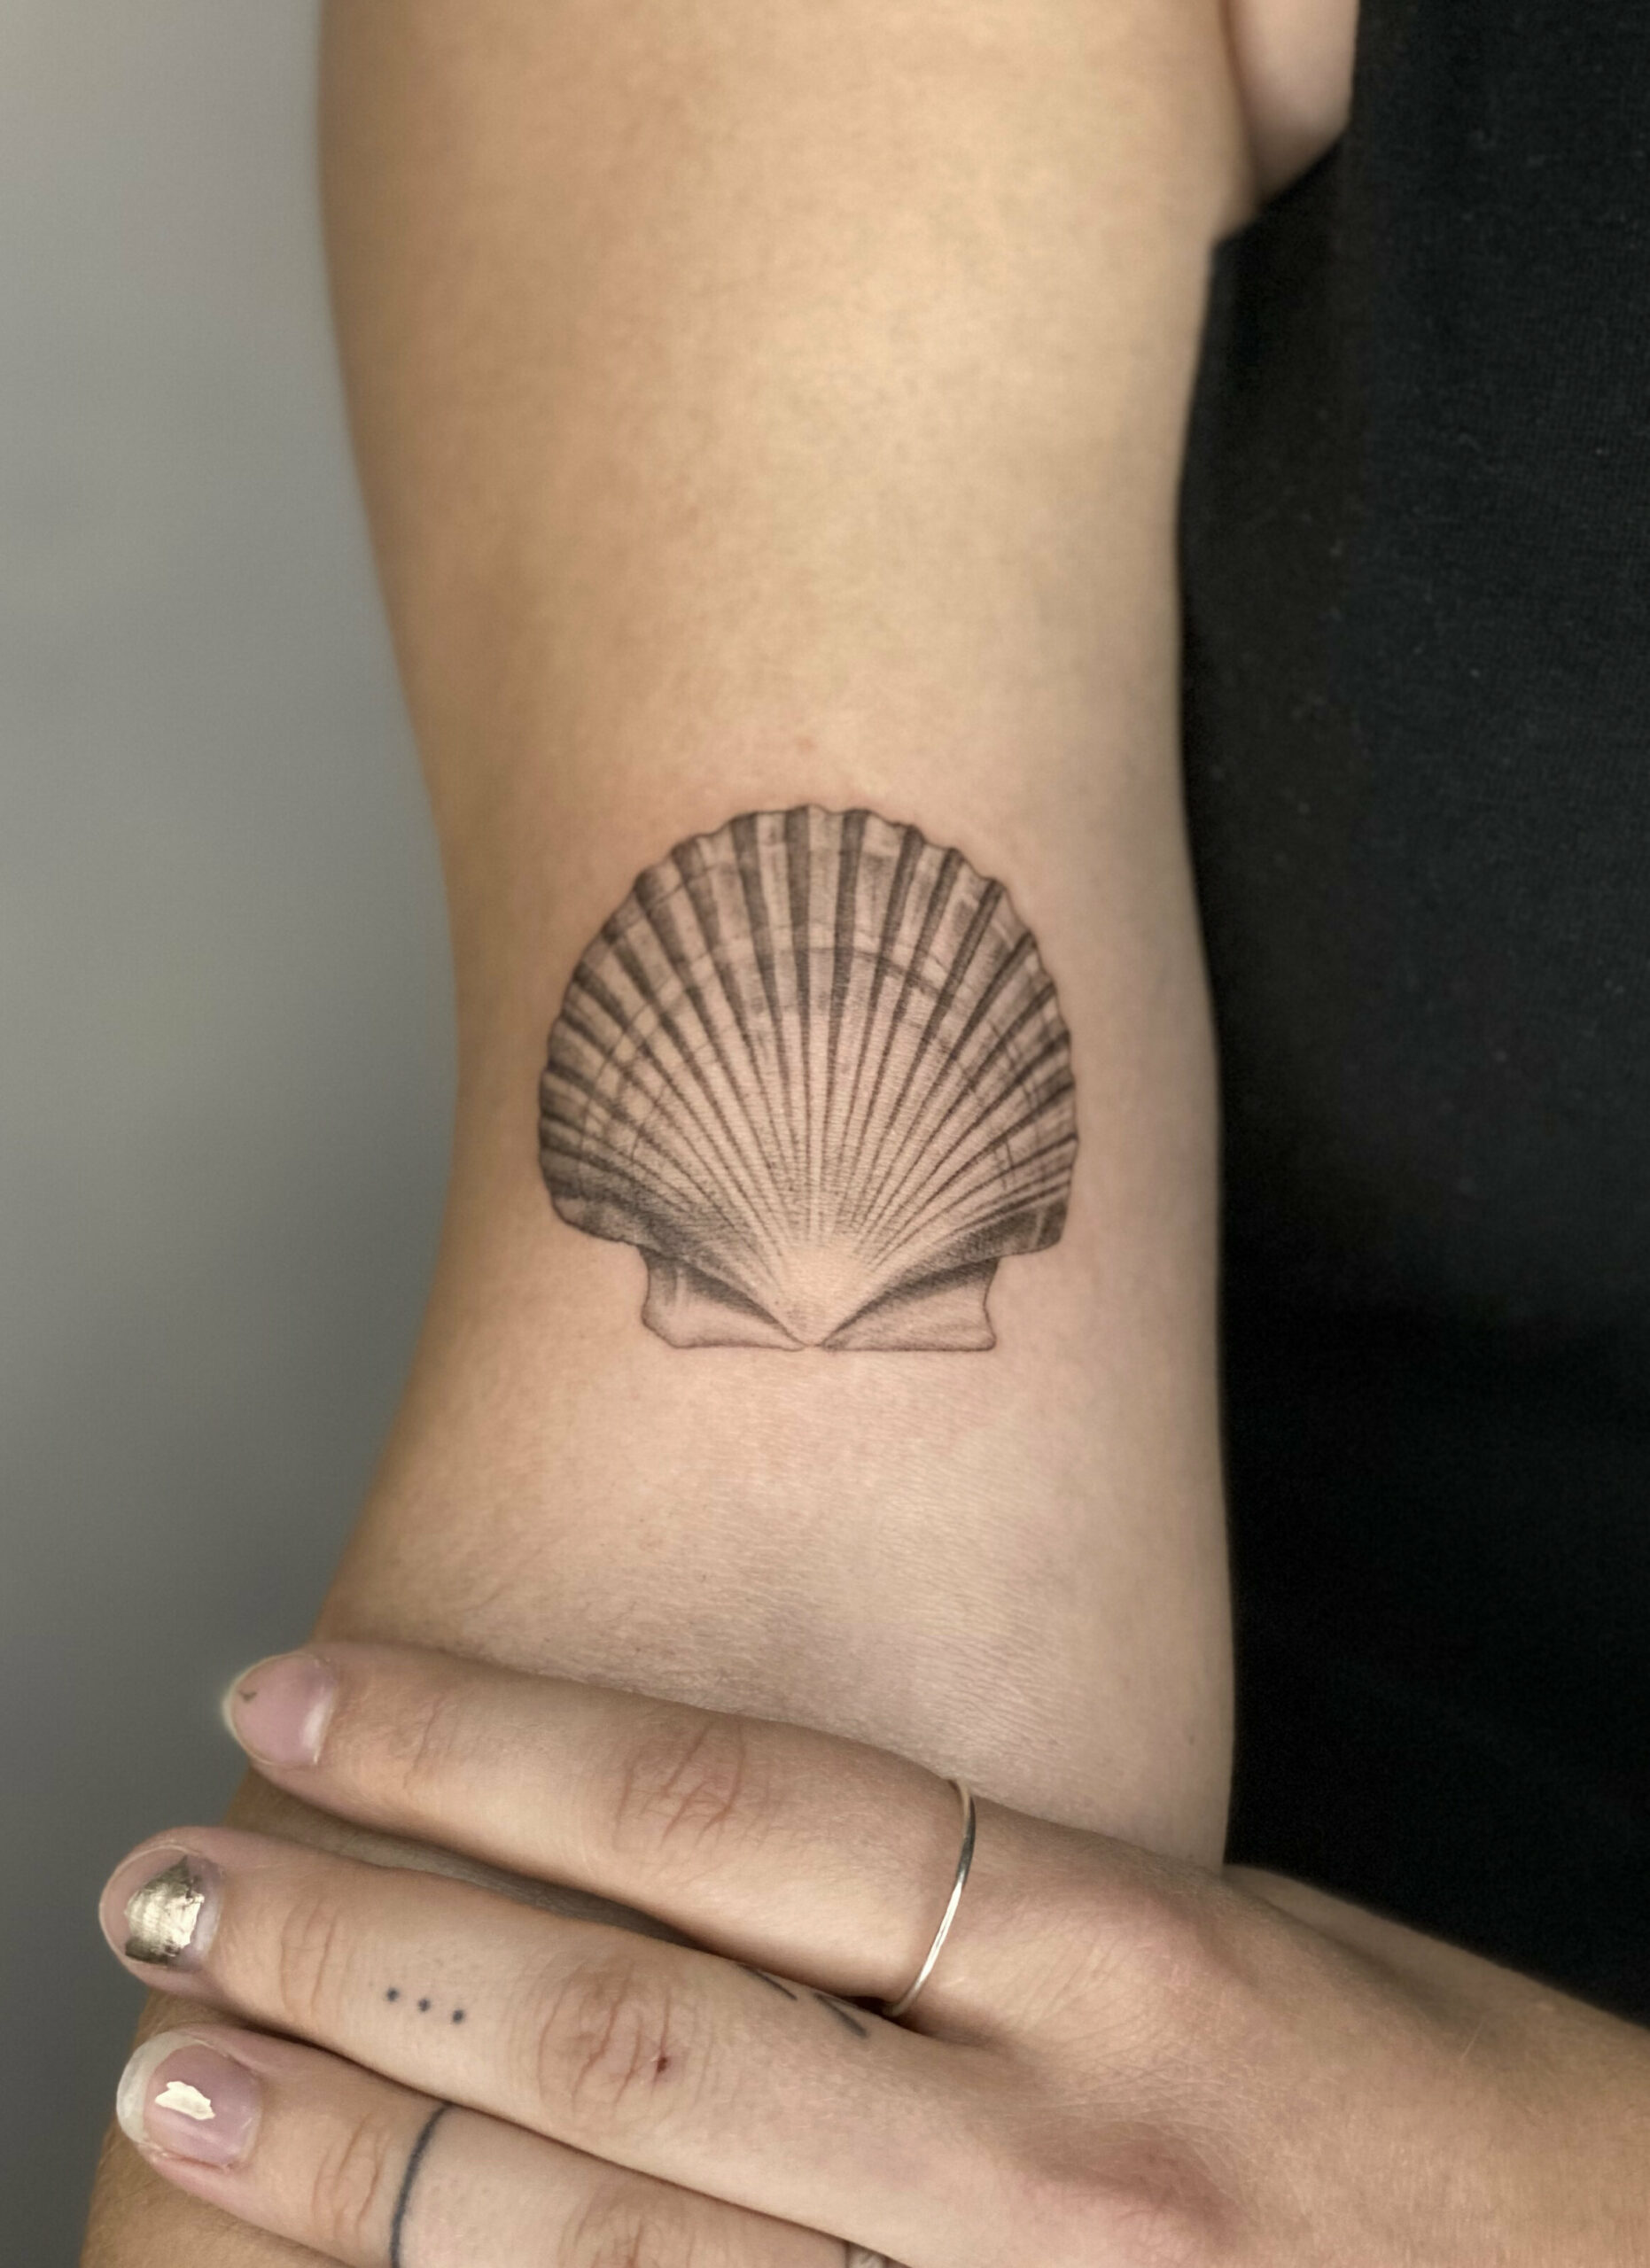 Shell tattoo meaning